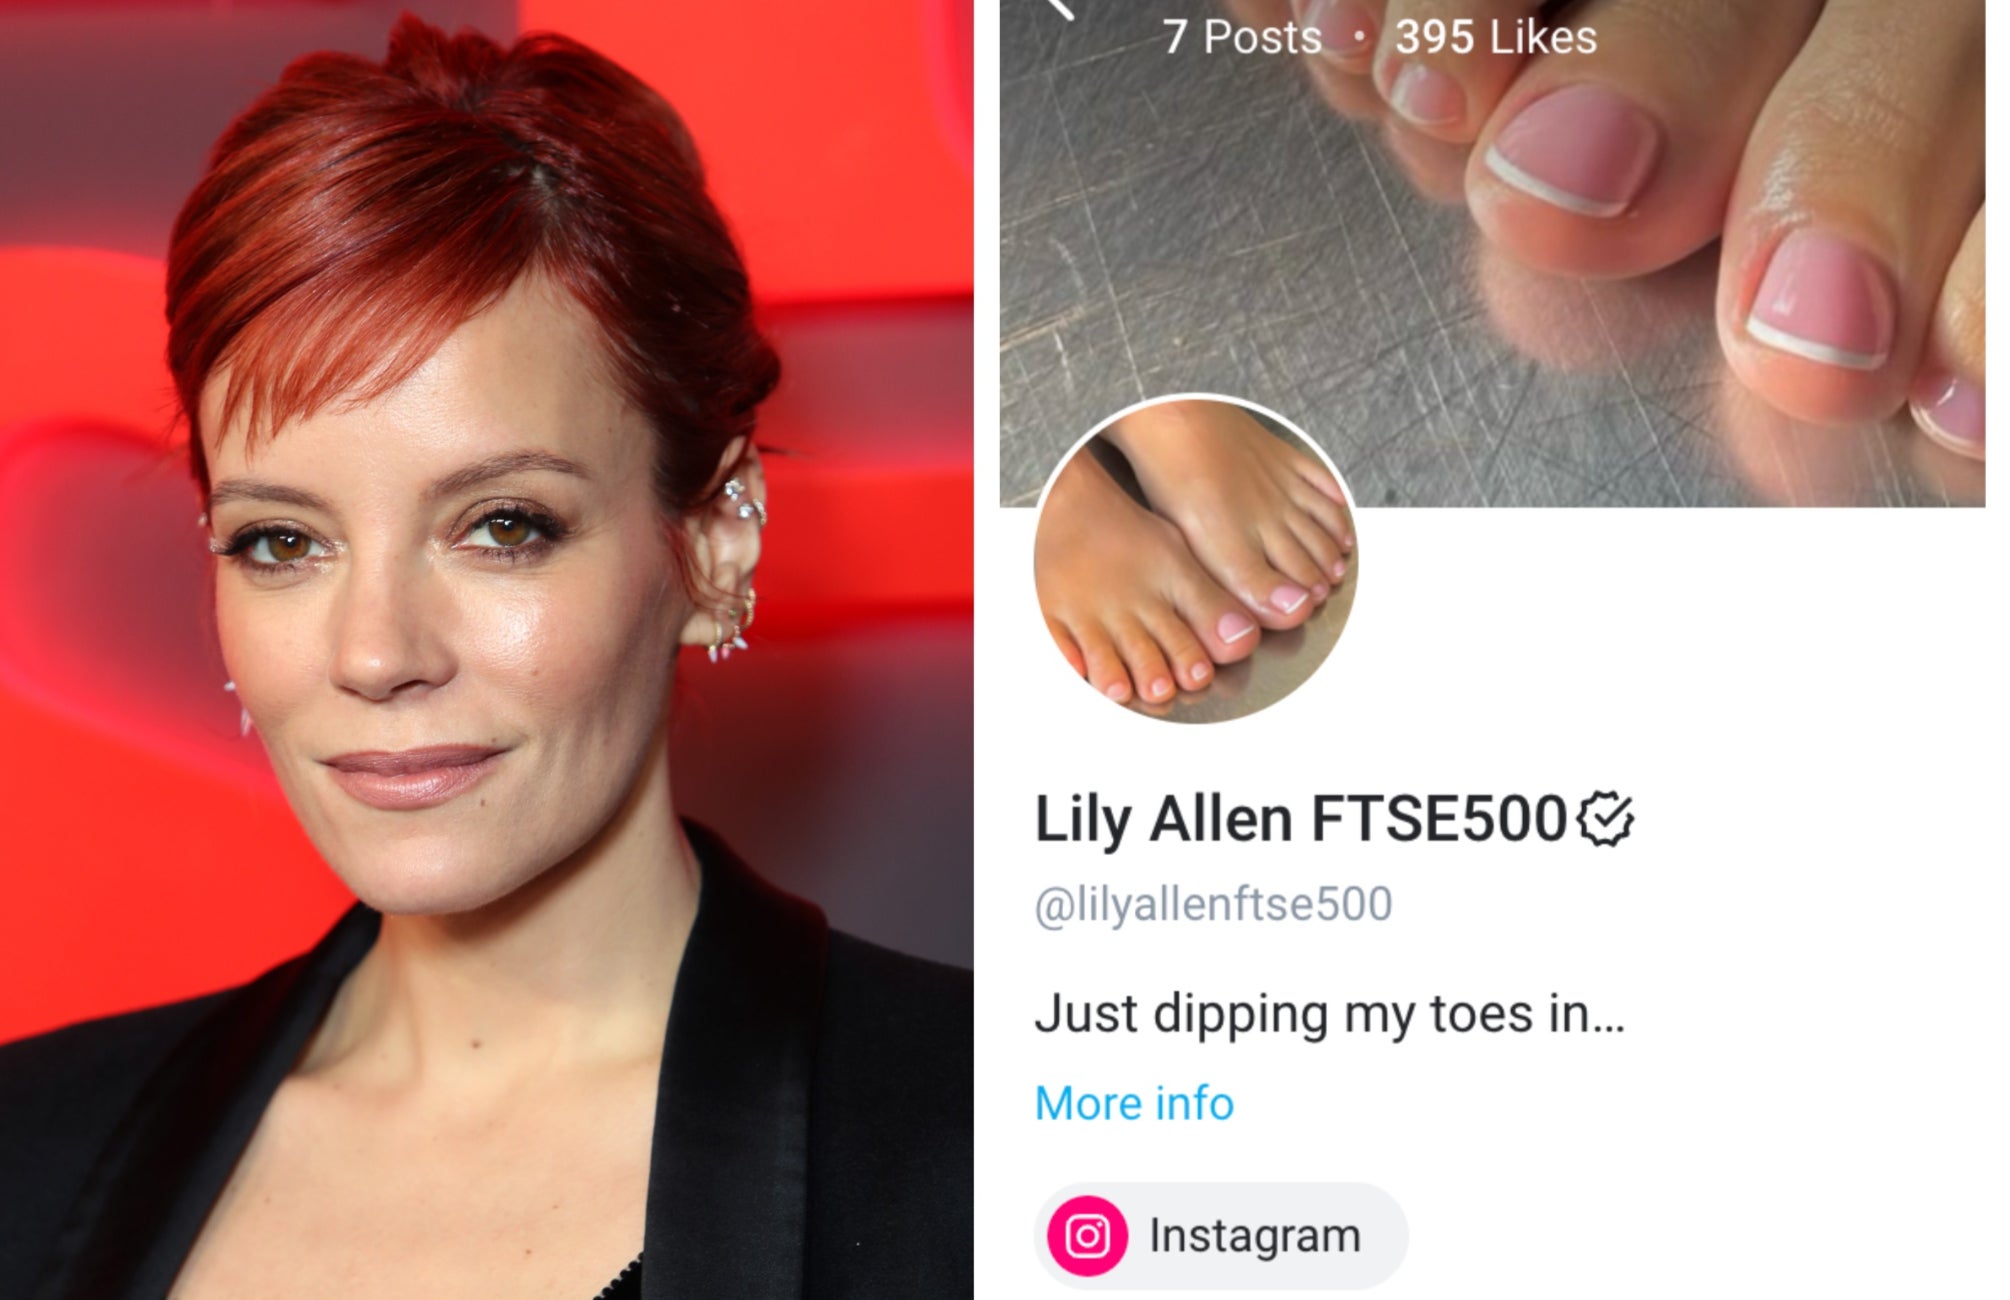 lily allen, onlyfans, feet, sex work, trevi fountain, lily allen joins onlyfans to sell pictures of her feet